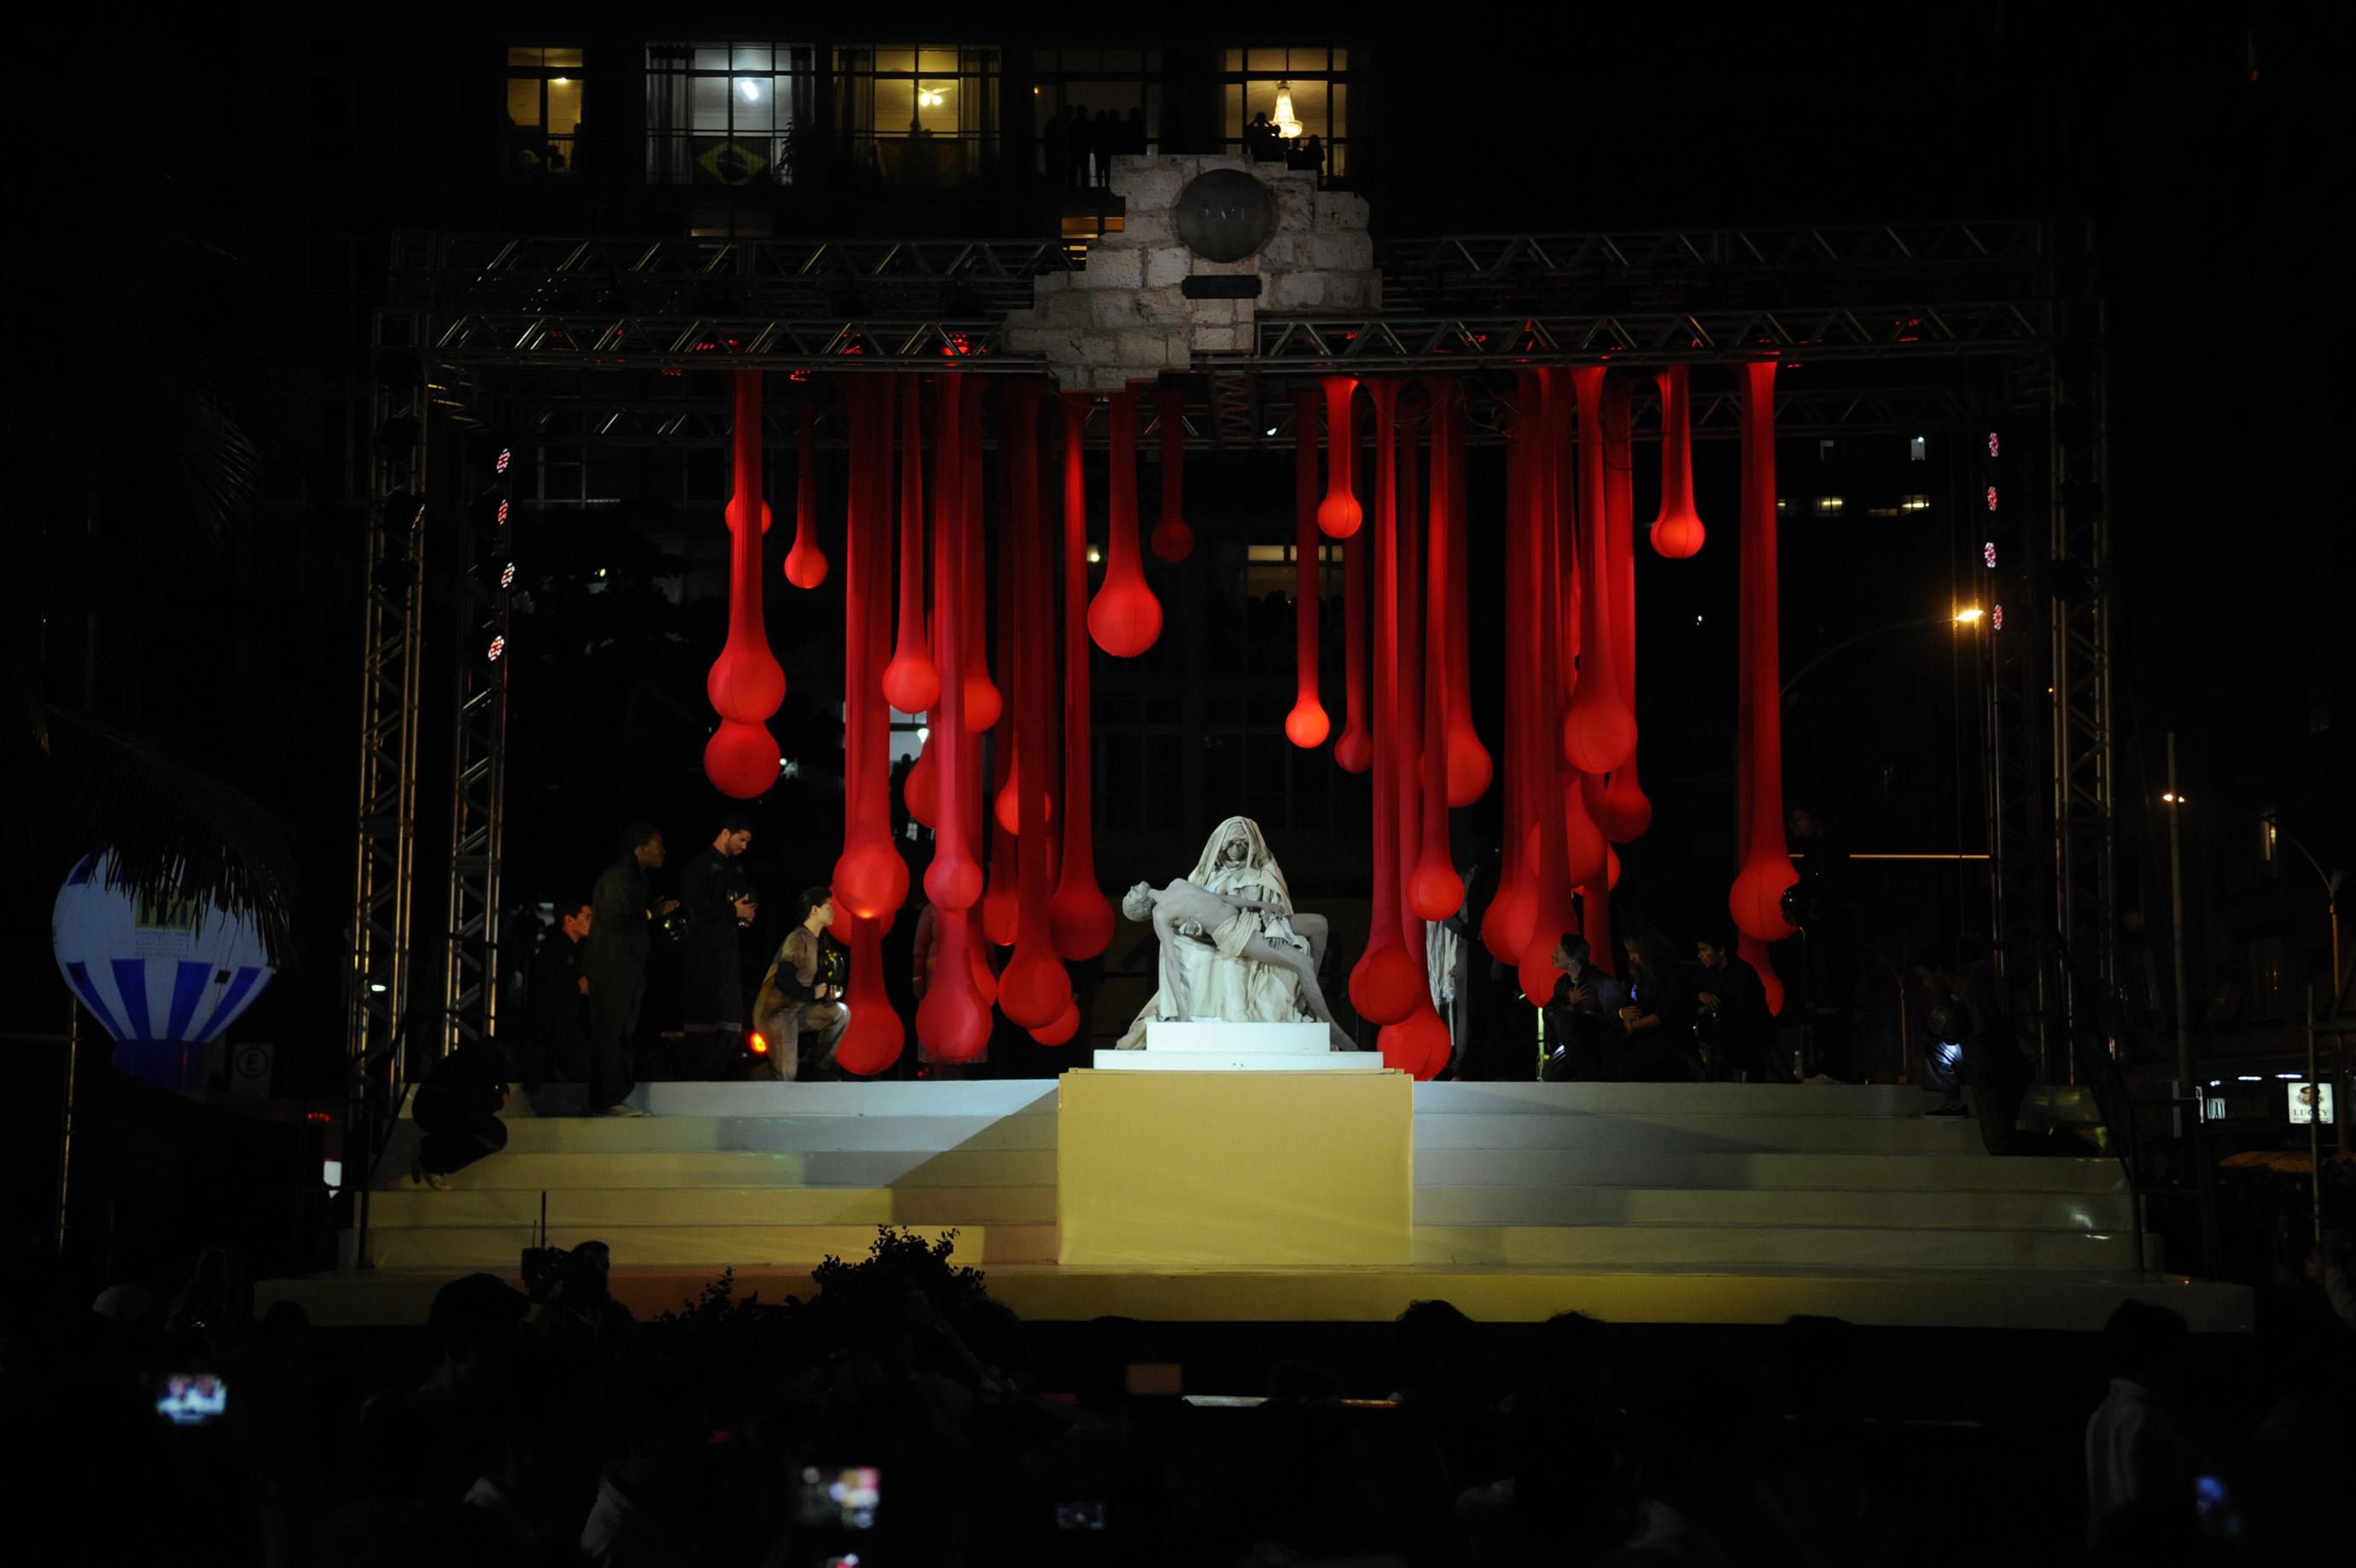 13th station - Via Crucis in Copacabana for the WYD 2013